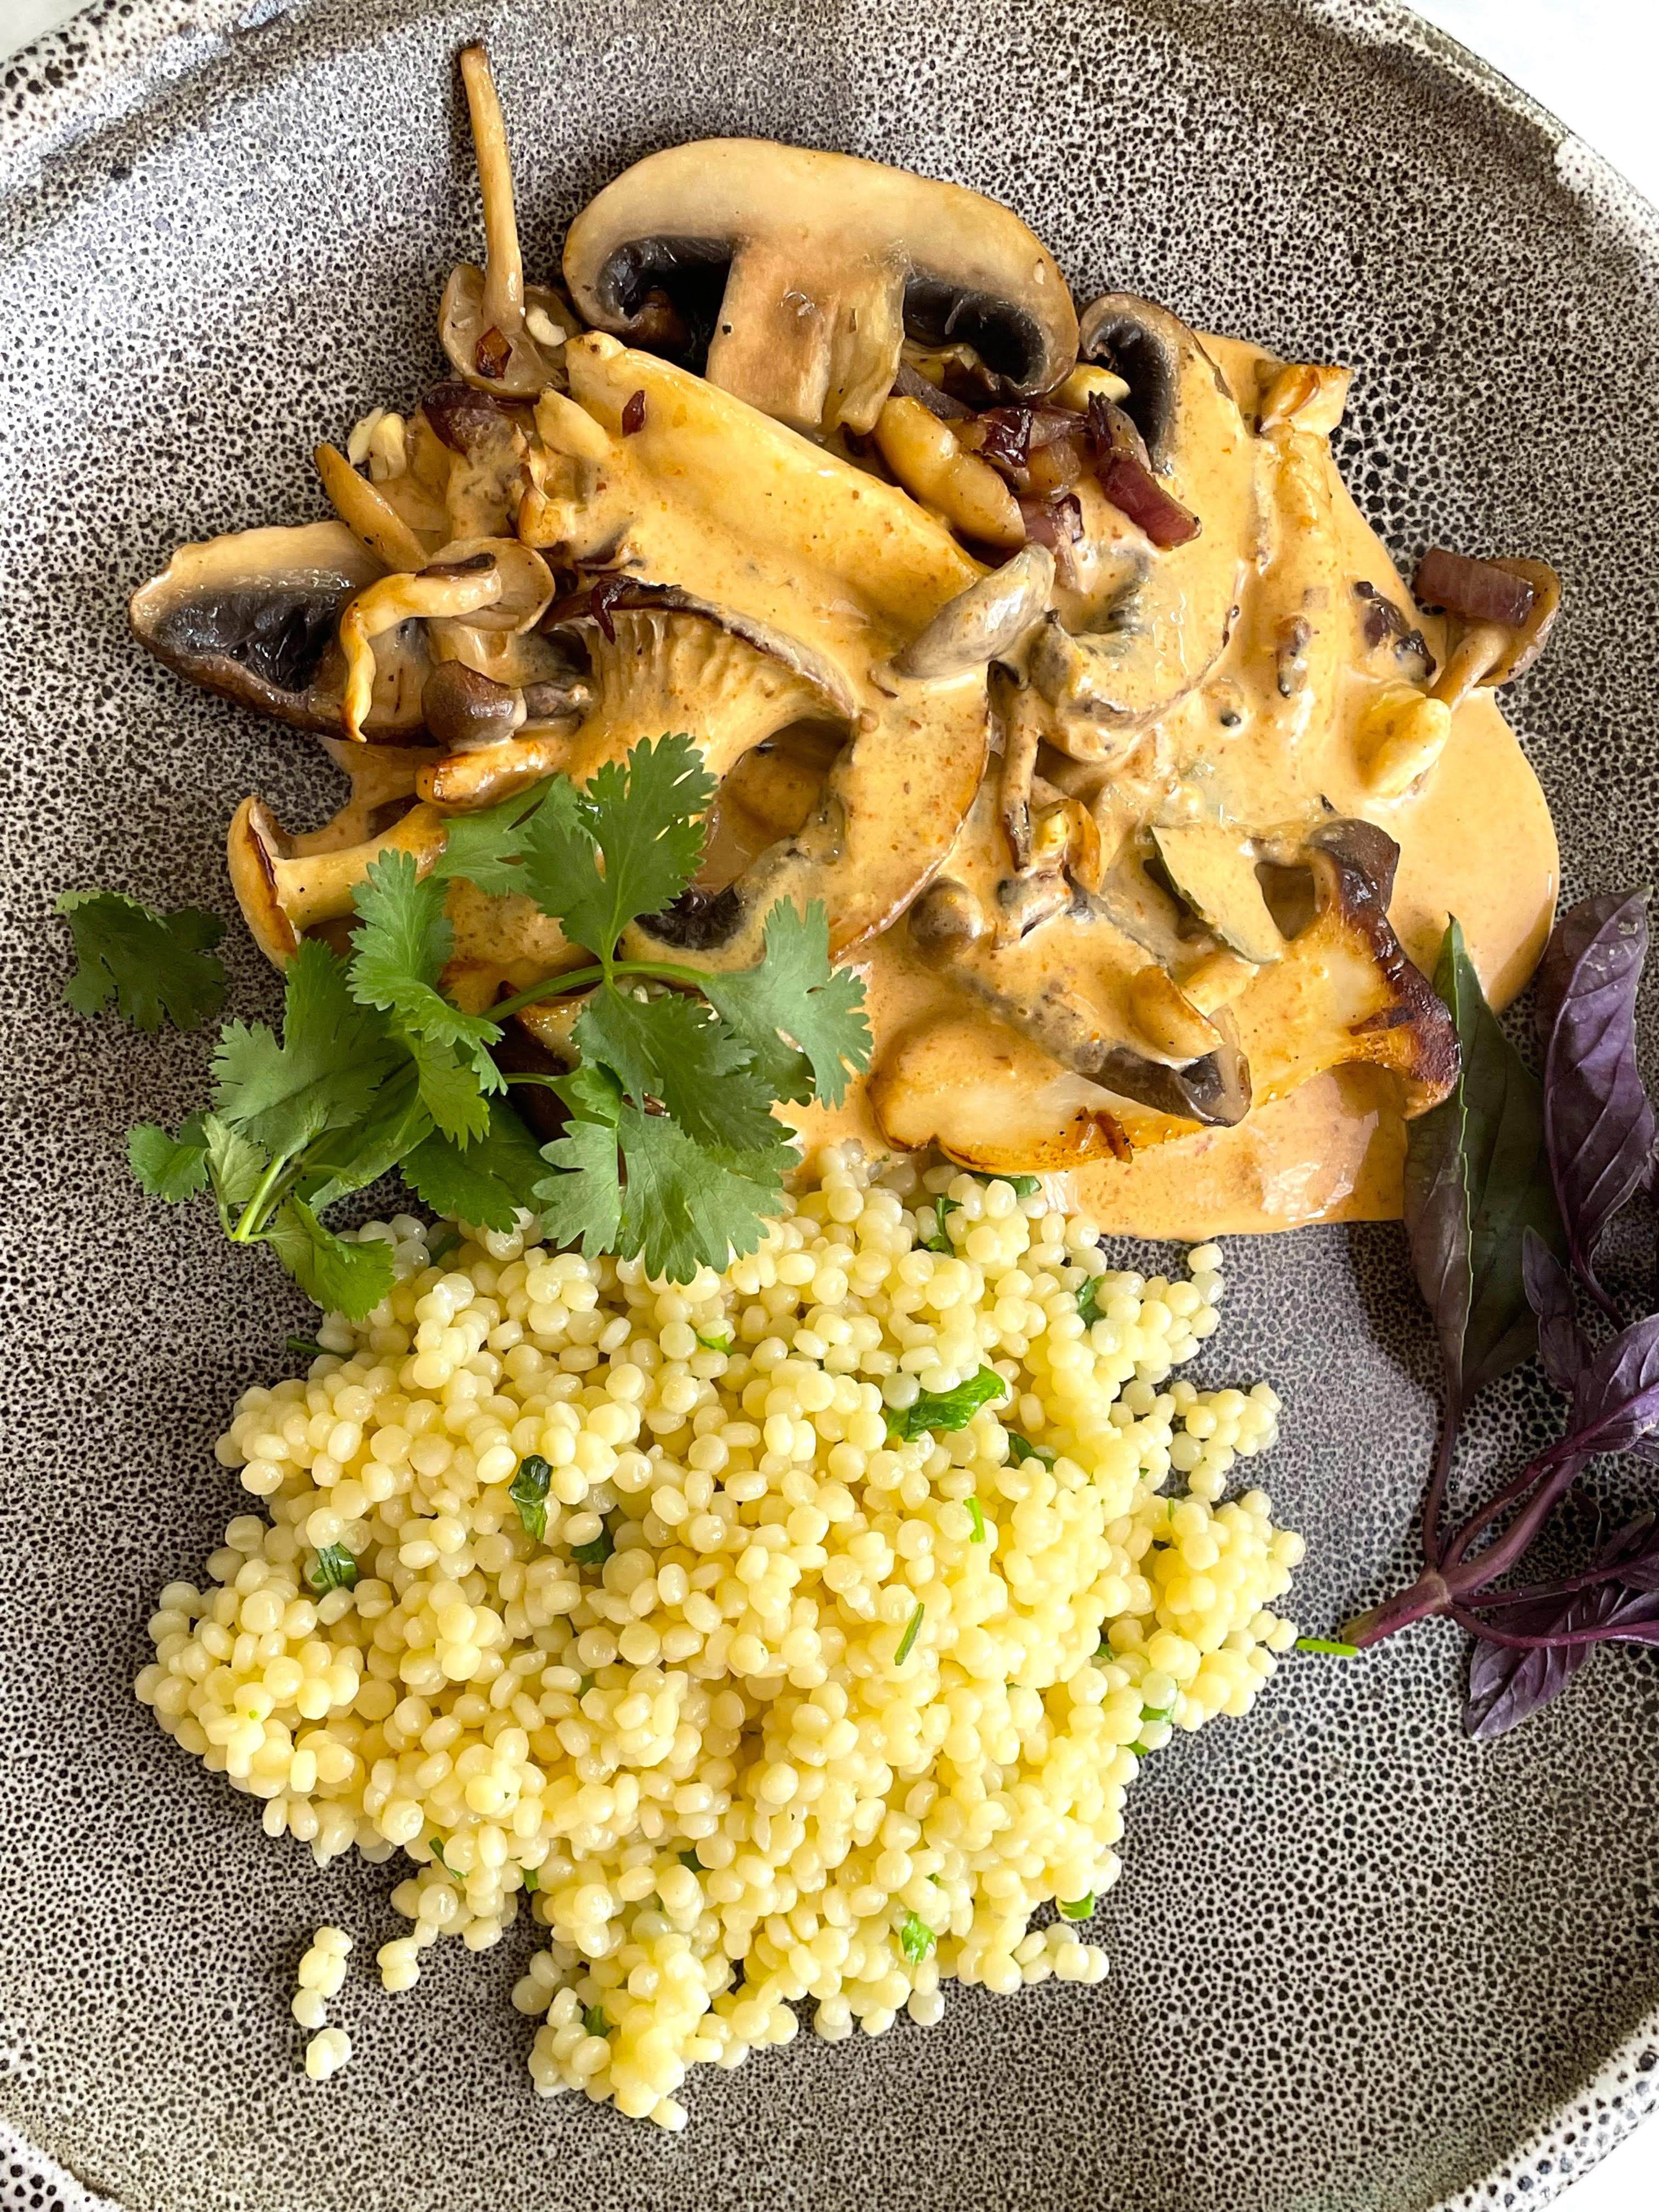 PANANG CURRY WITH MUSHROOMS AND PEARL COUS-COUS